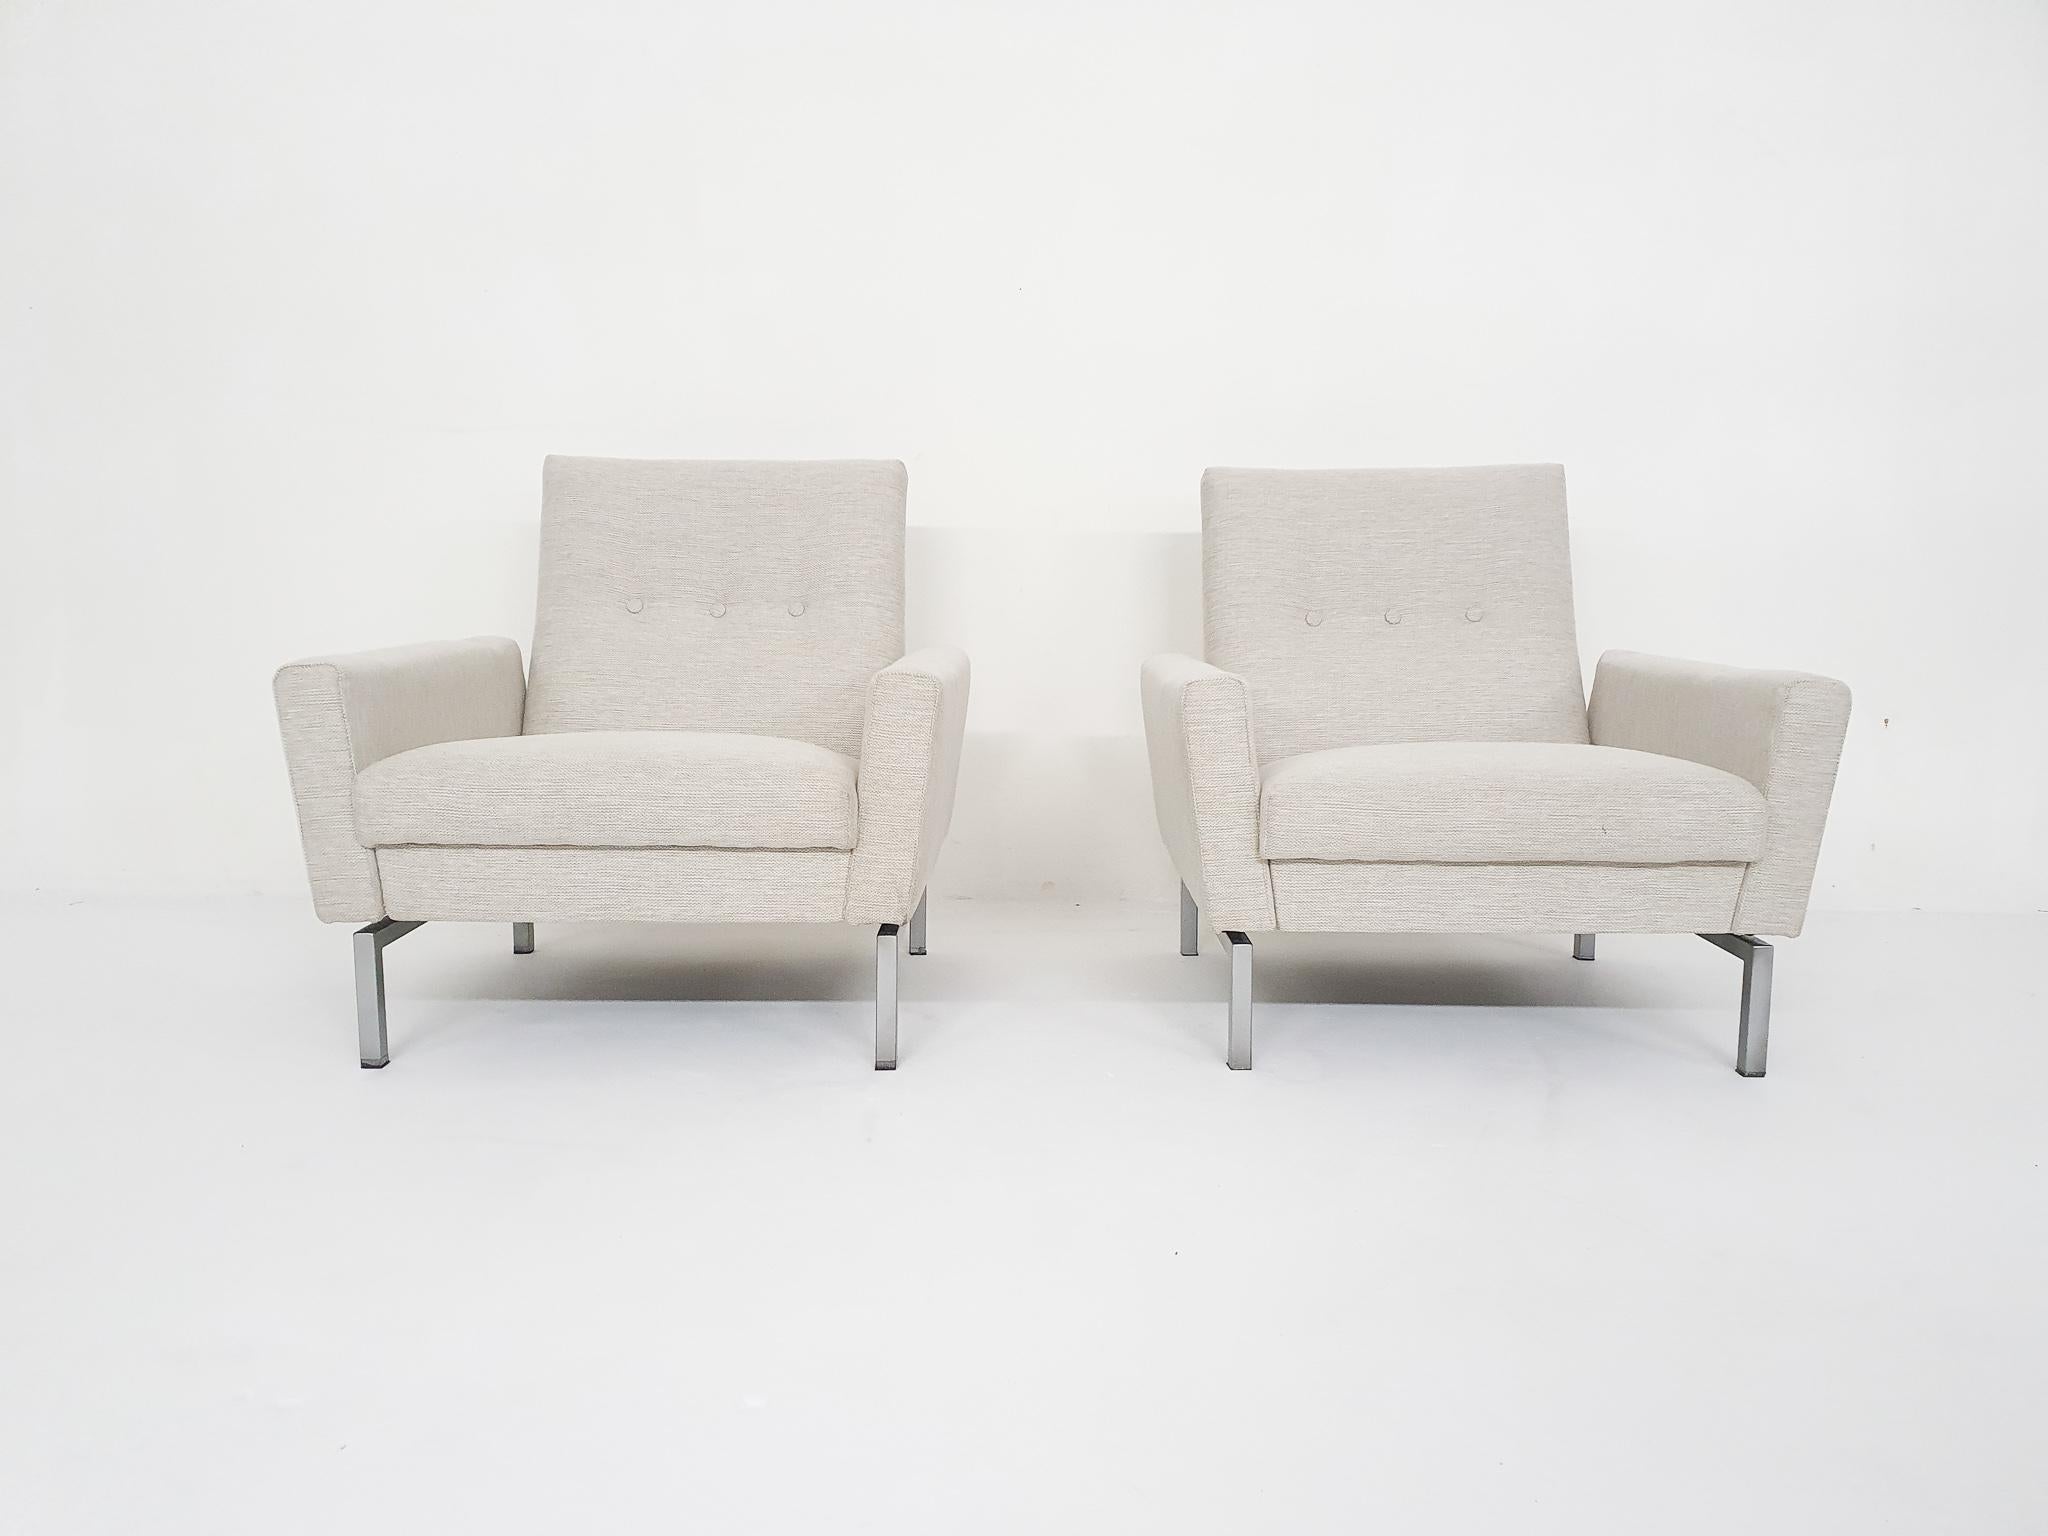 Dutch Set of Two Mid-Century Modern Lounge Chairs Attr. Artifort, The Netherlands 1950 For Sale